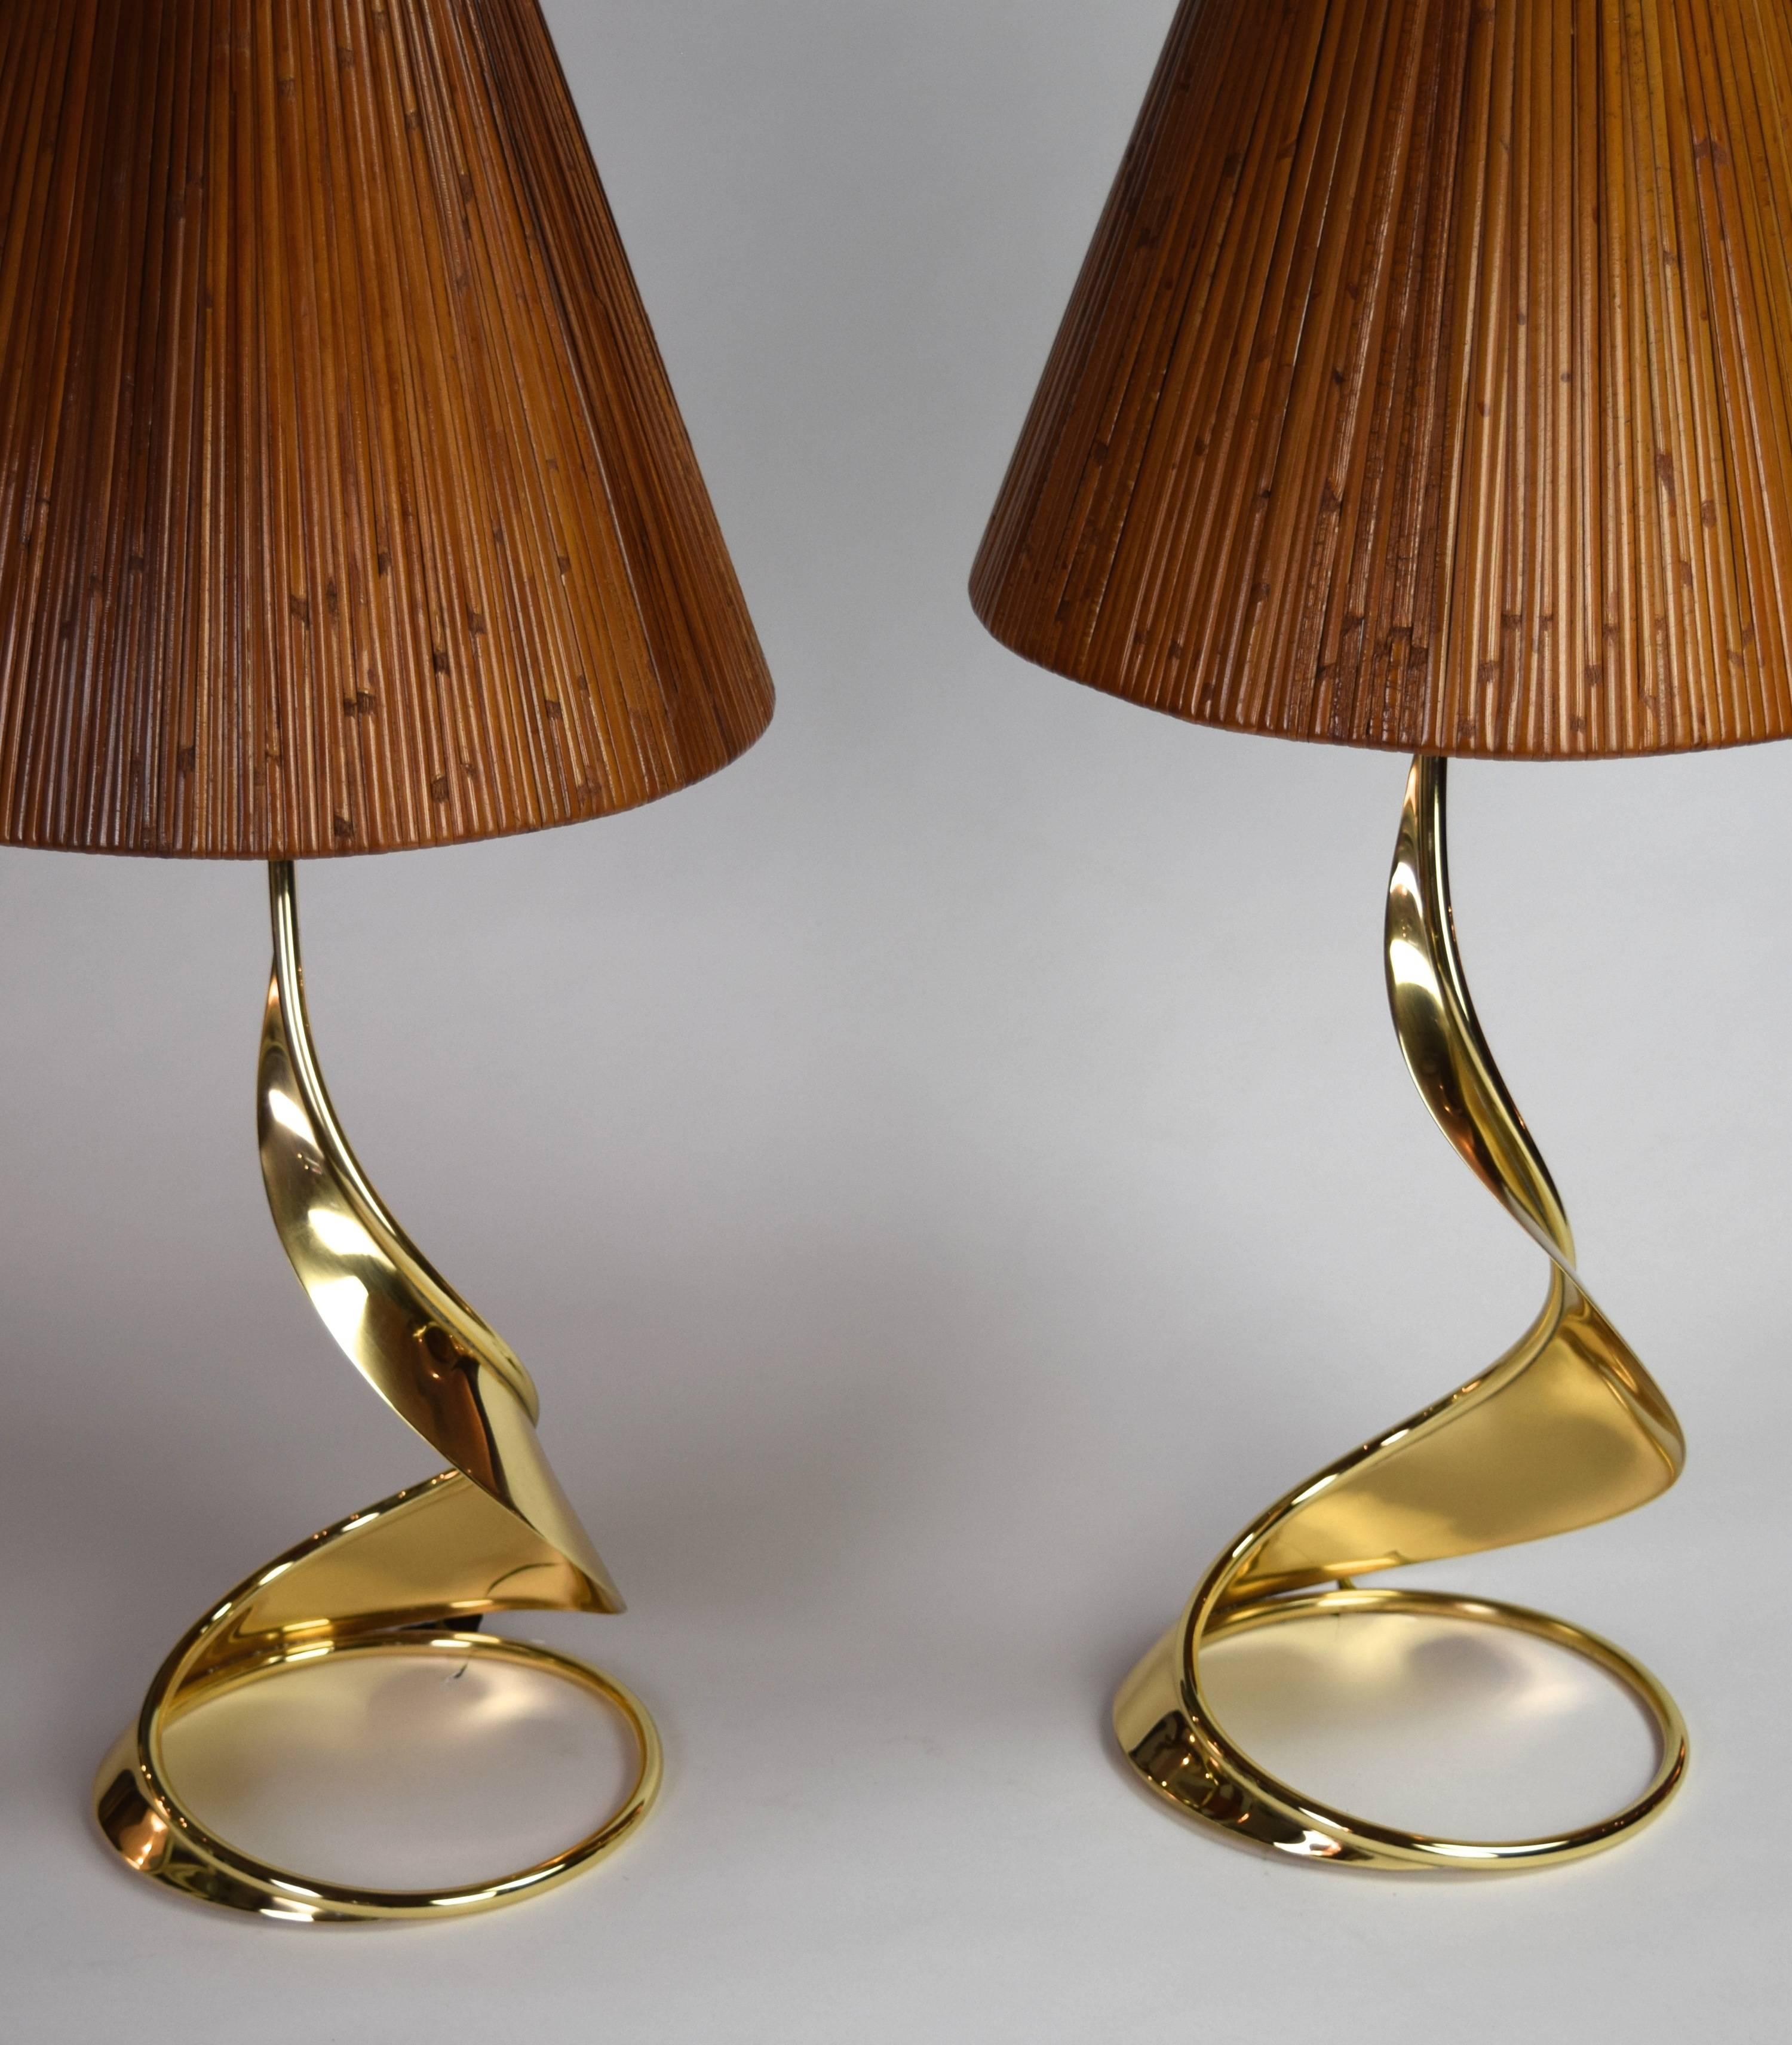 Late 20th Century Pair of Brass Spiral Lamps with Bamboo Shades